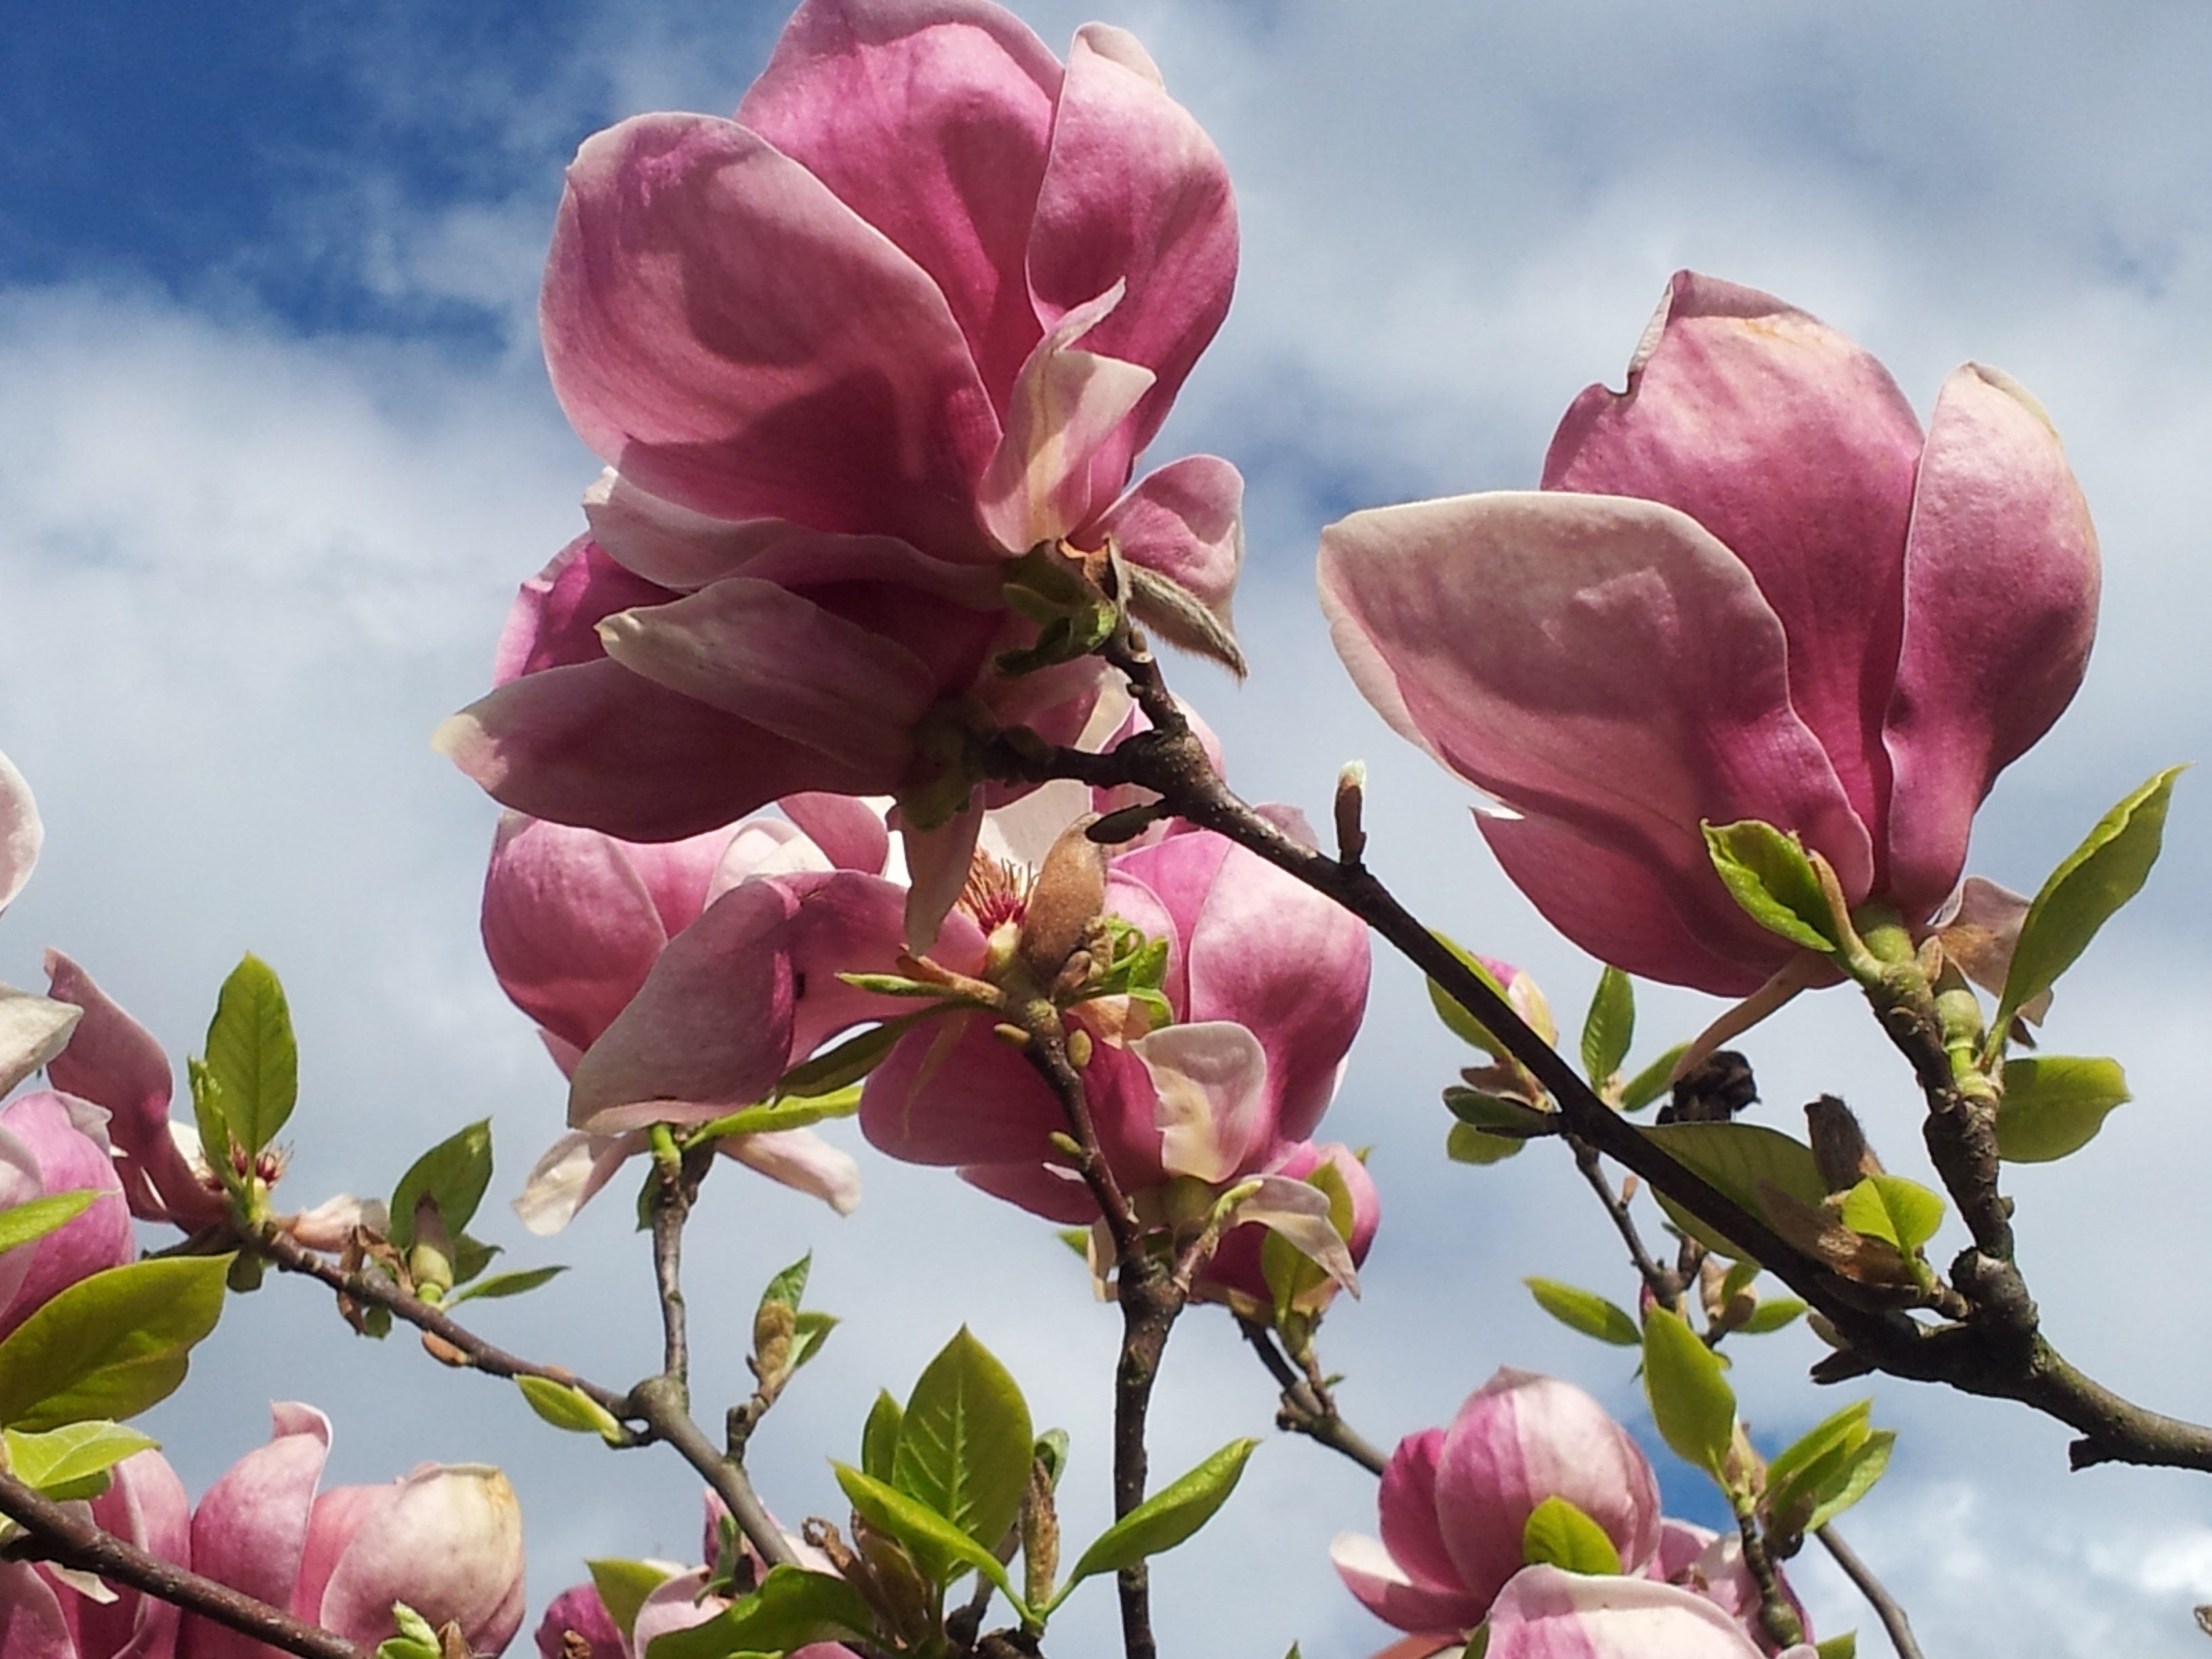 pink fruit blossoms under cloudy sky at daytime